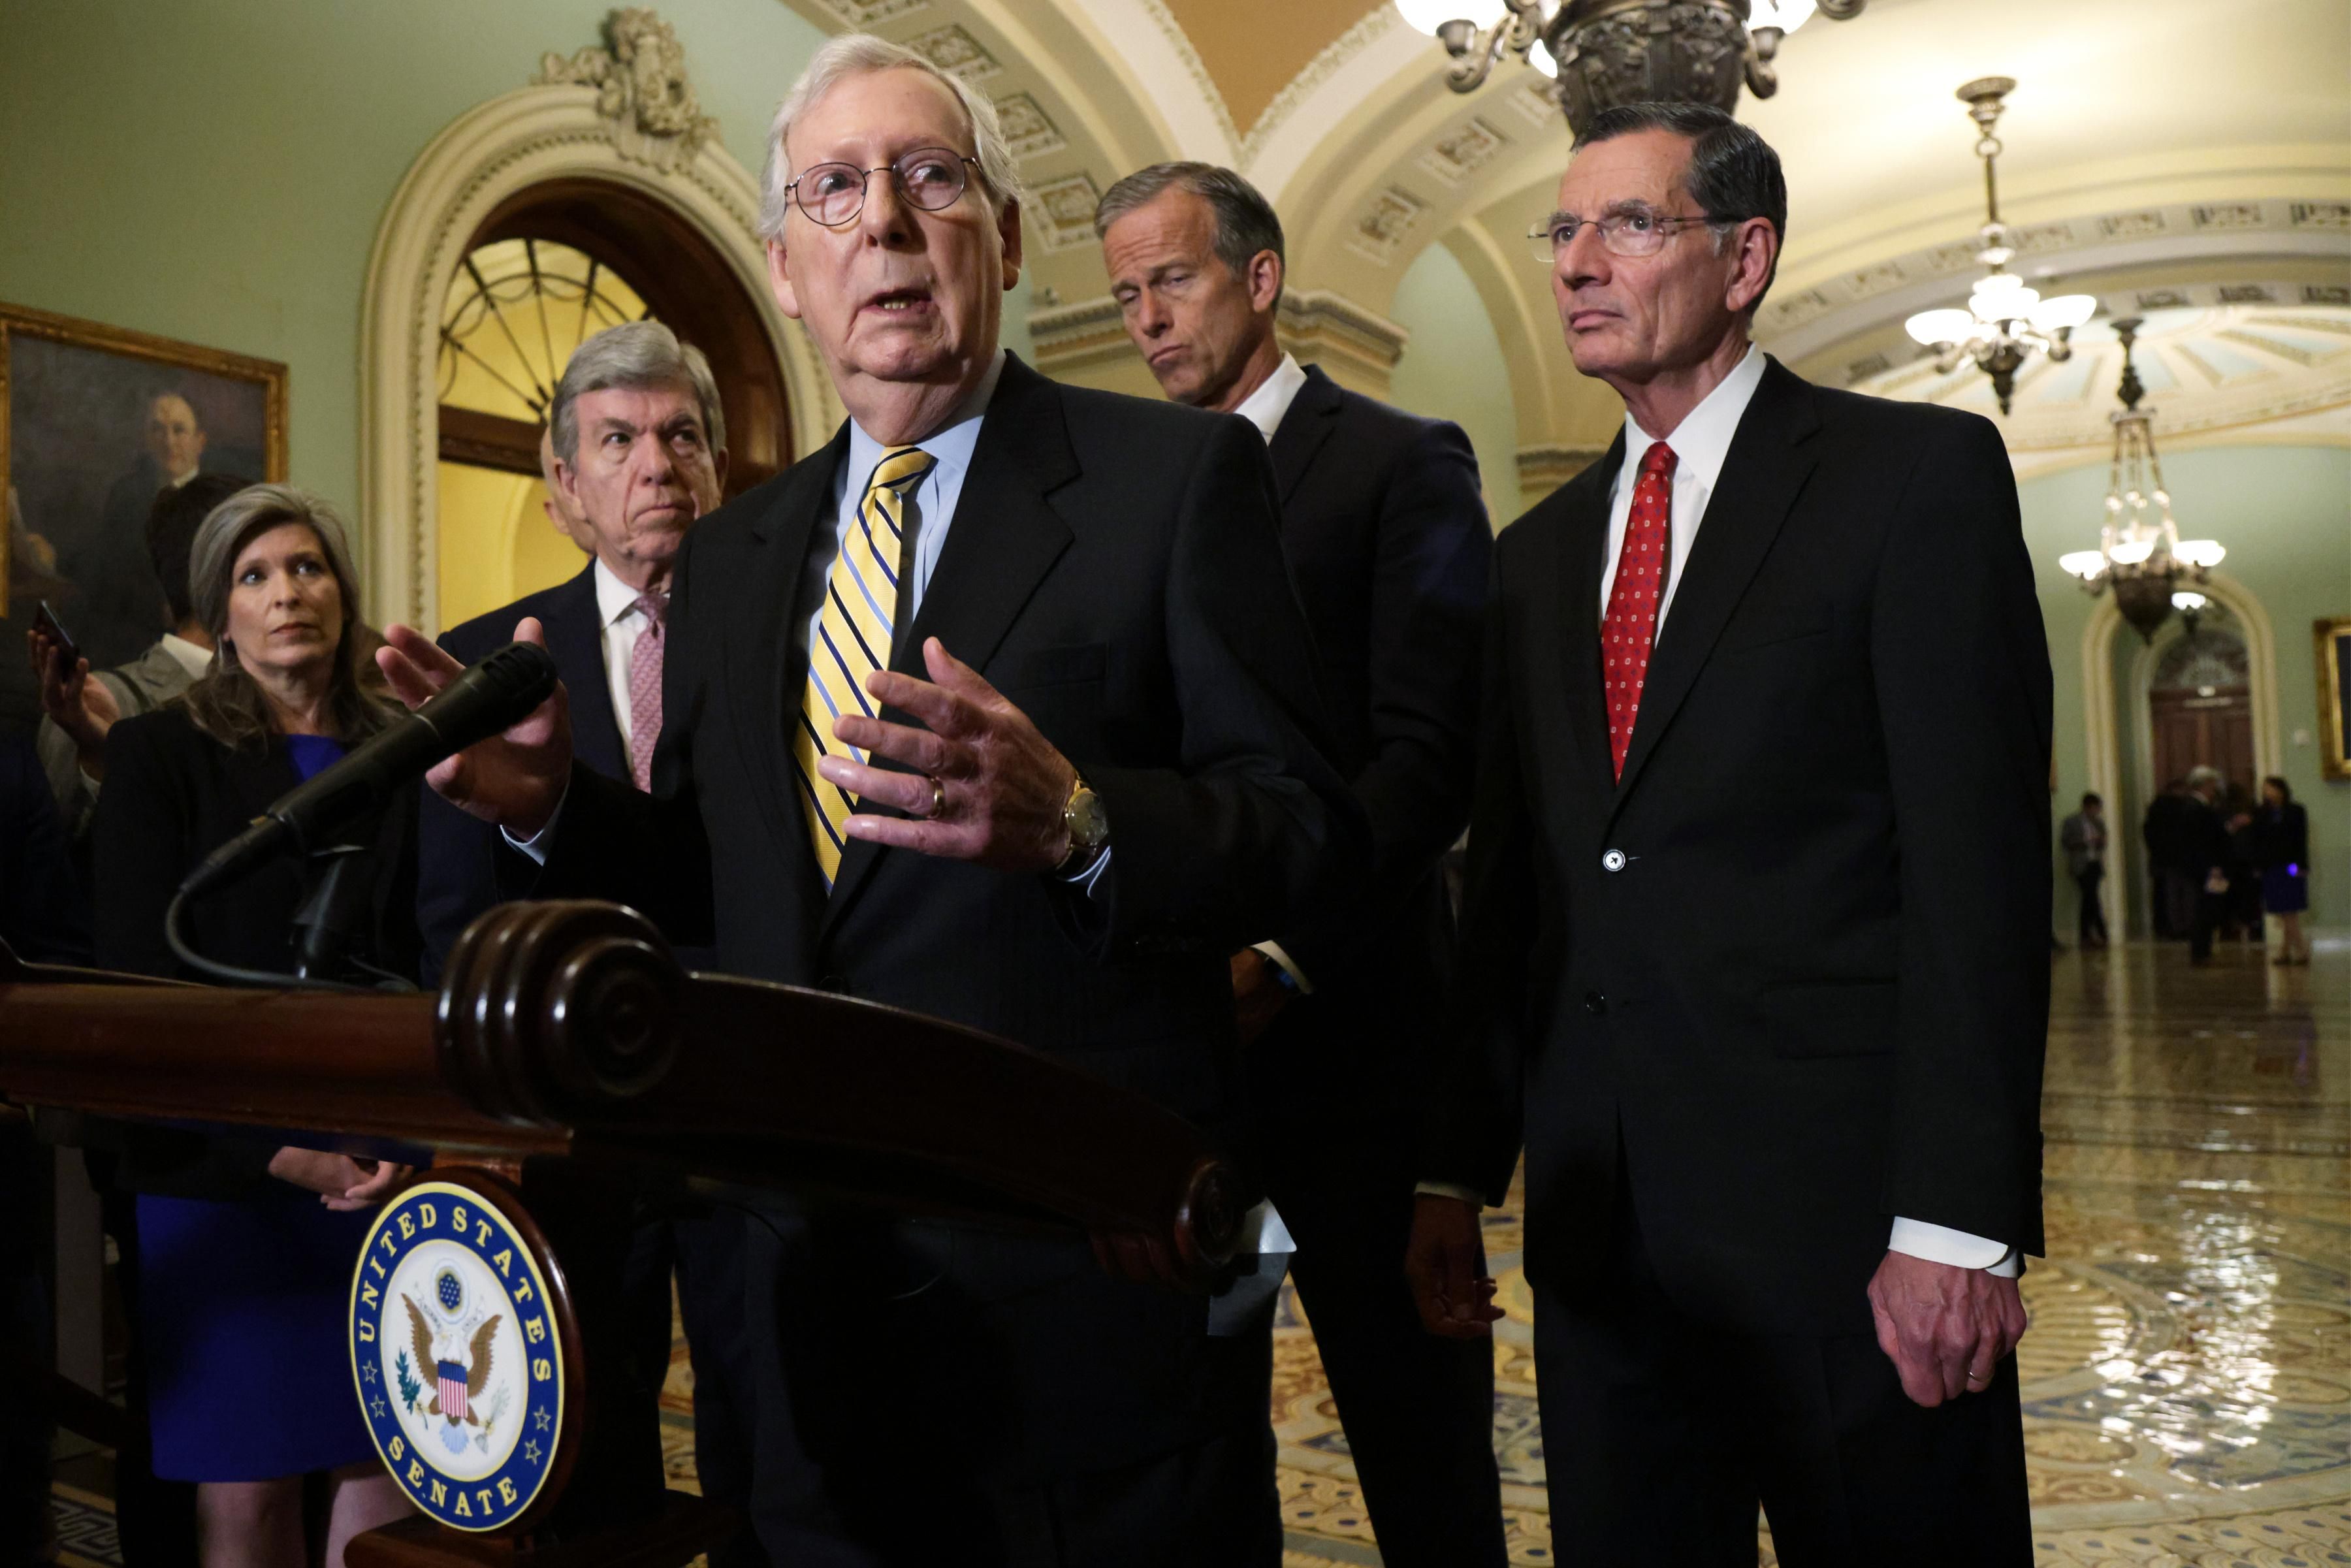 Senate Minority Leader Mitch McConnell speaks at a press conference